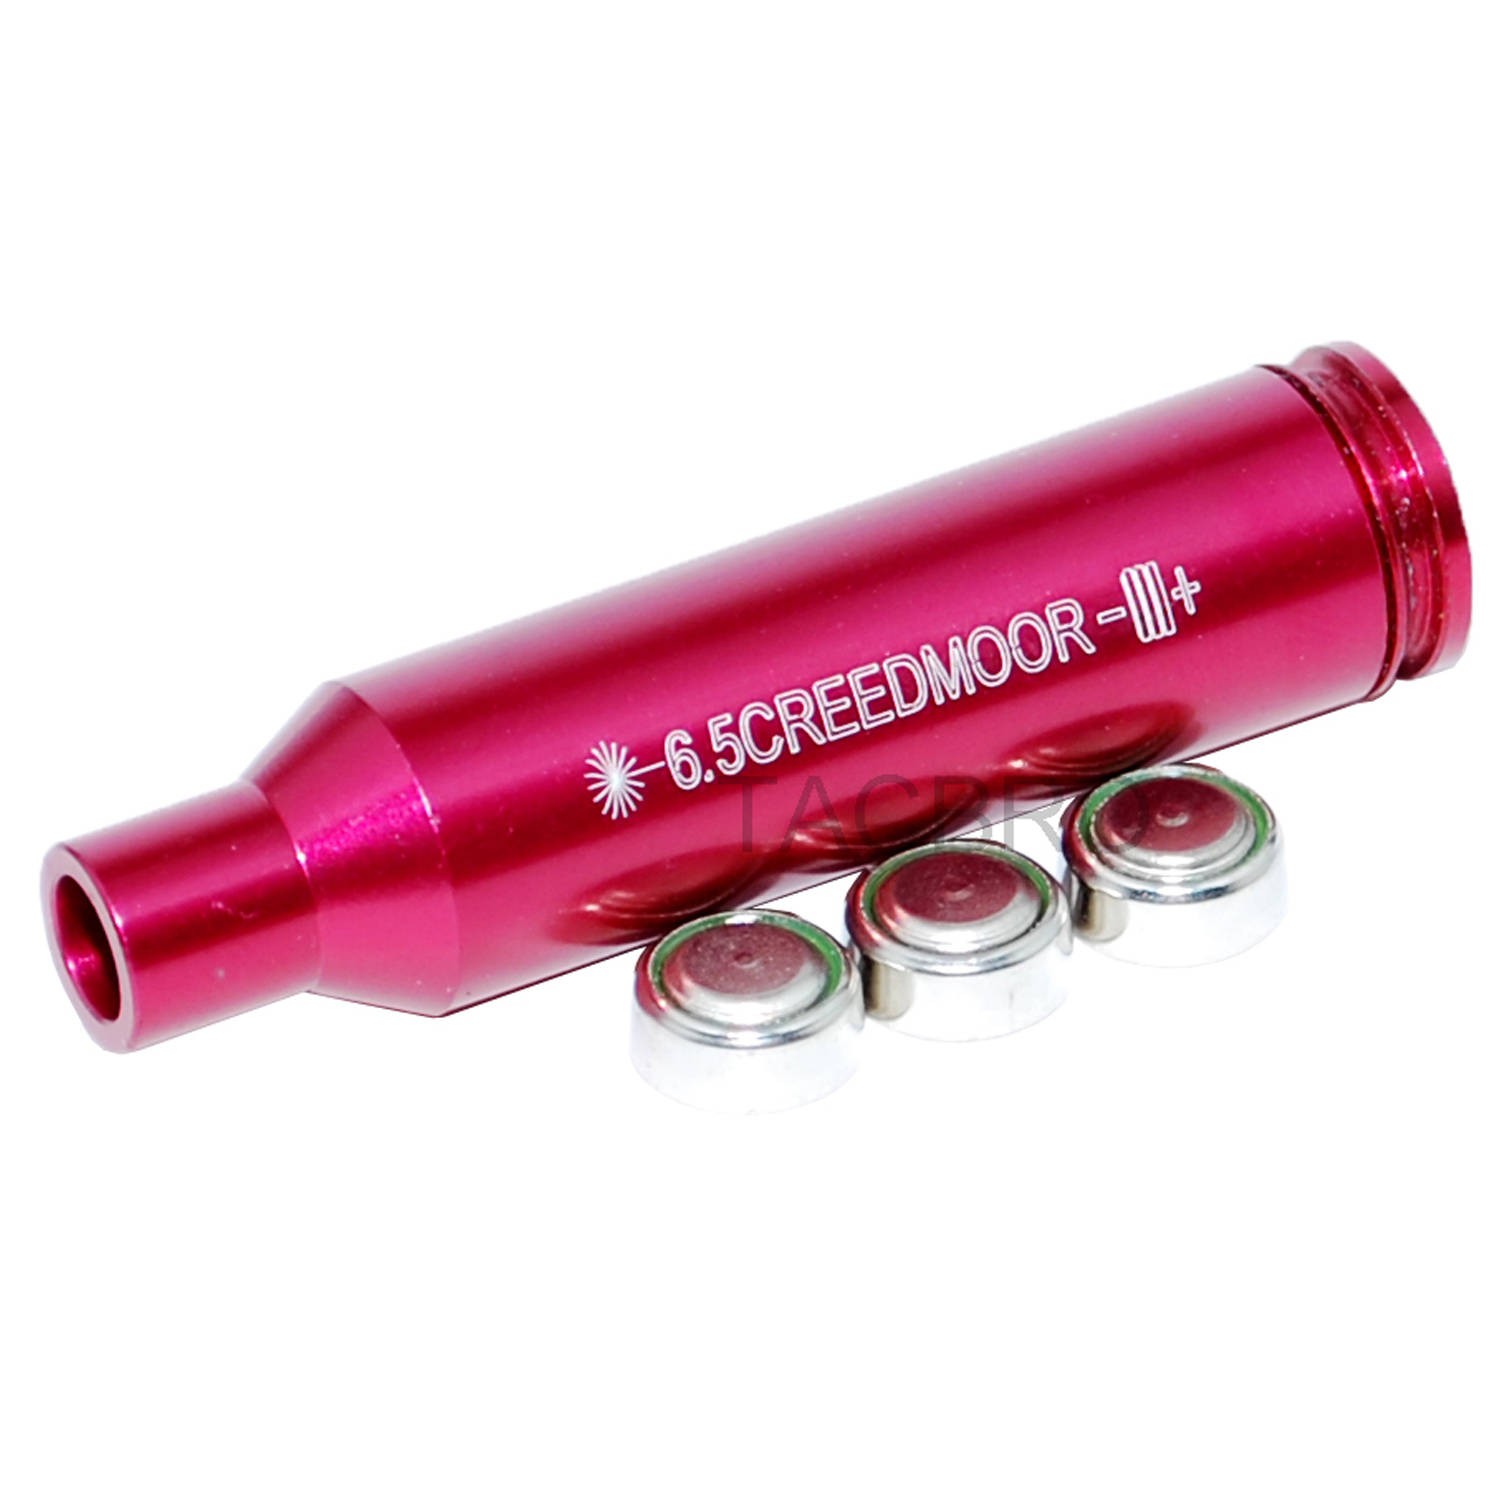 Details about   6.5 Creedmoor Red Laser Bore Sighter Boresighter Anodized Red Battery I 